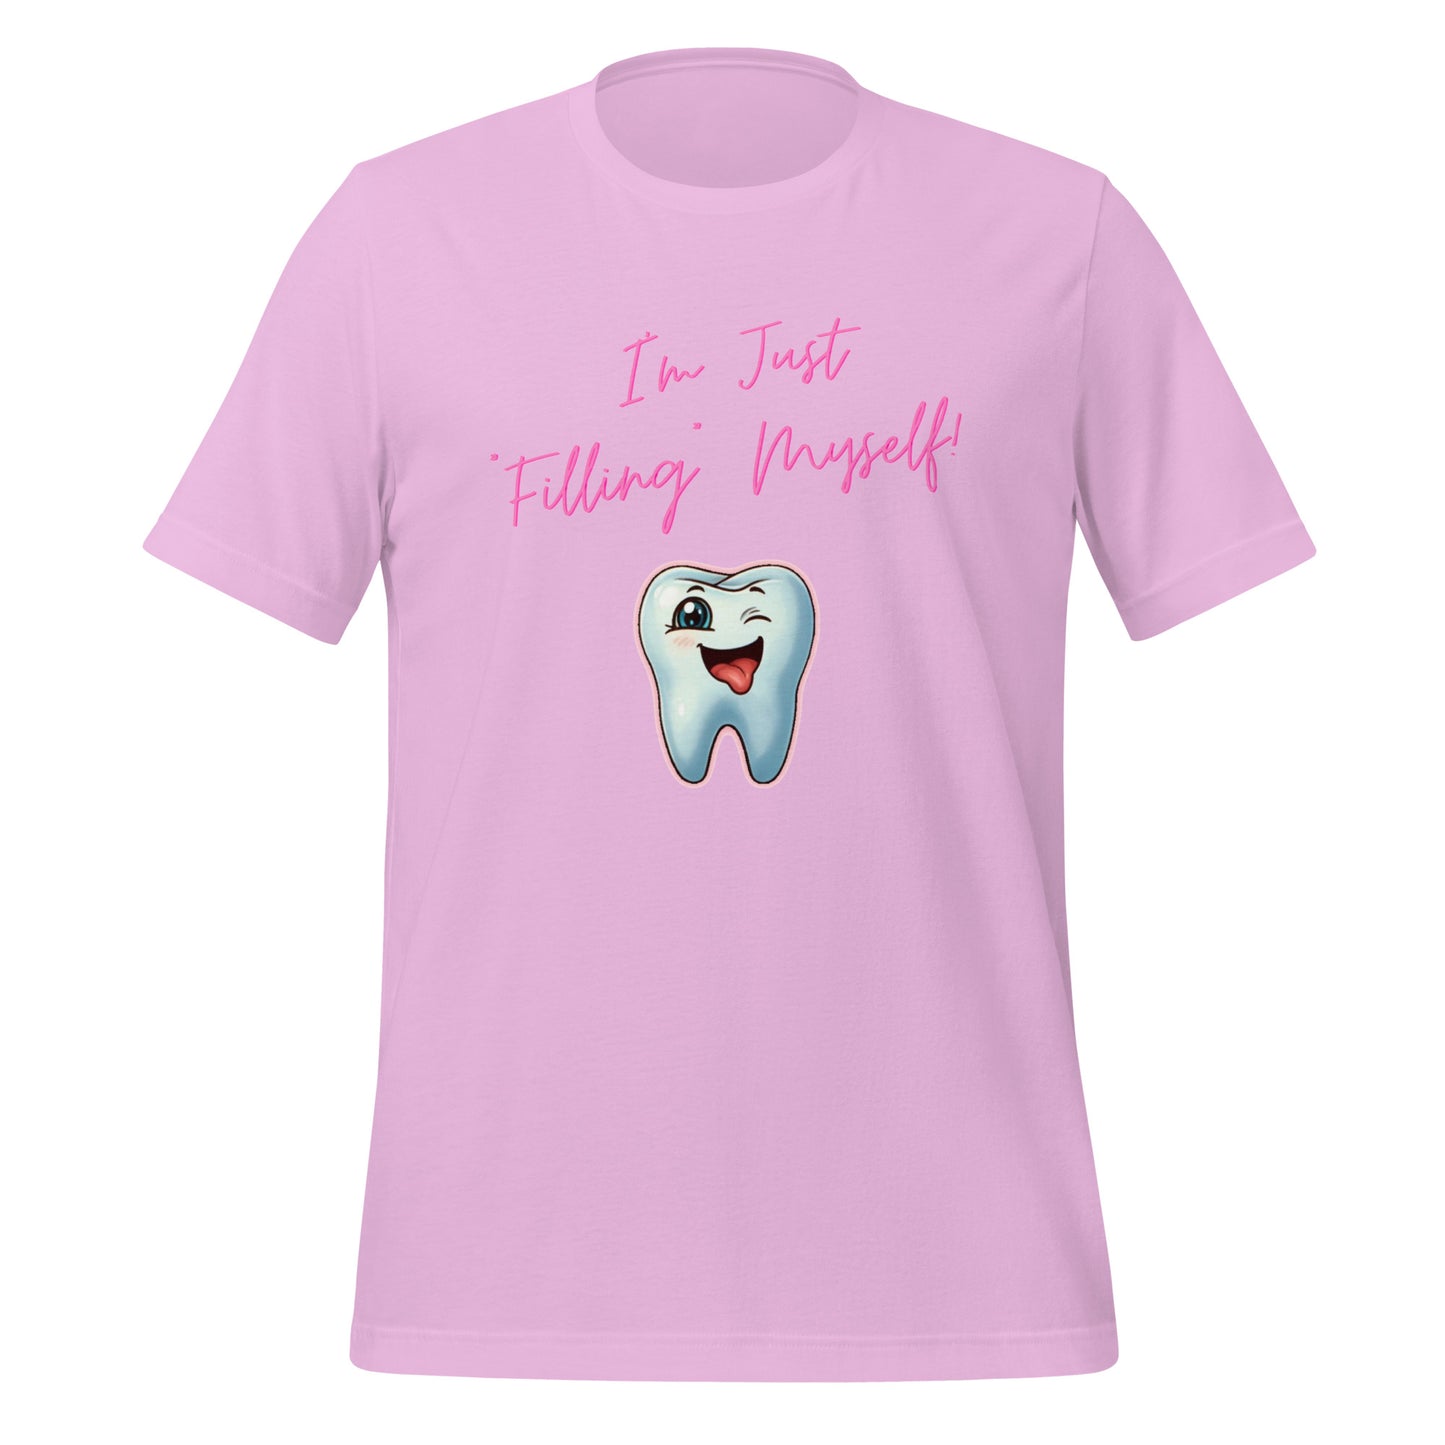 Flirtatious winking cartoon tooth character with the phrase "I'm just filling myself!" Ideal for a funny dental t-shirt or a cute dental assistant shirt. Lilac color. 